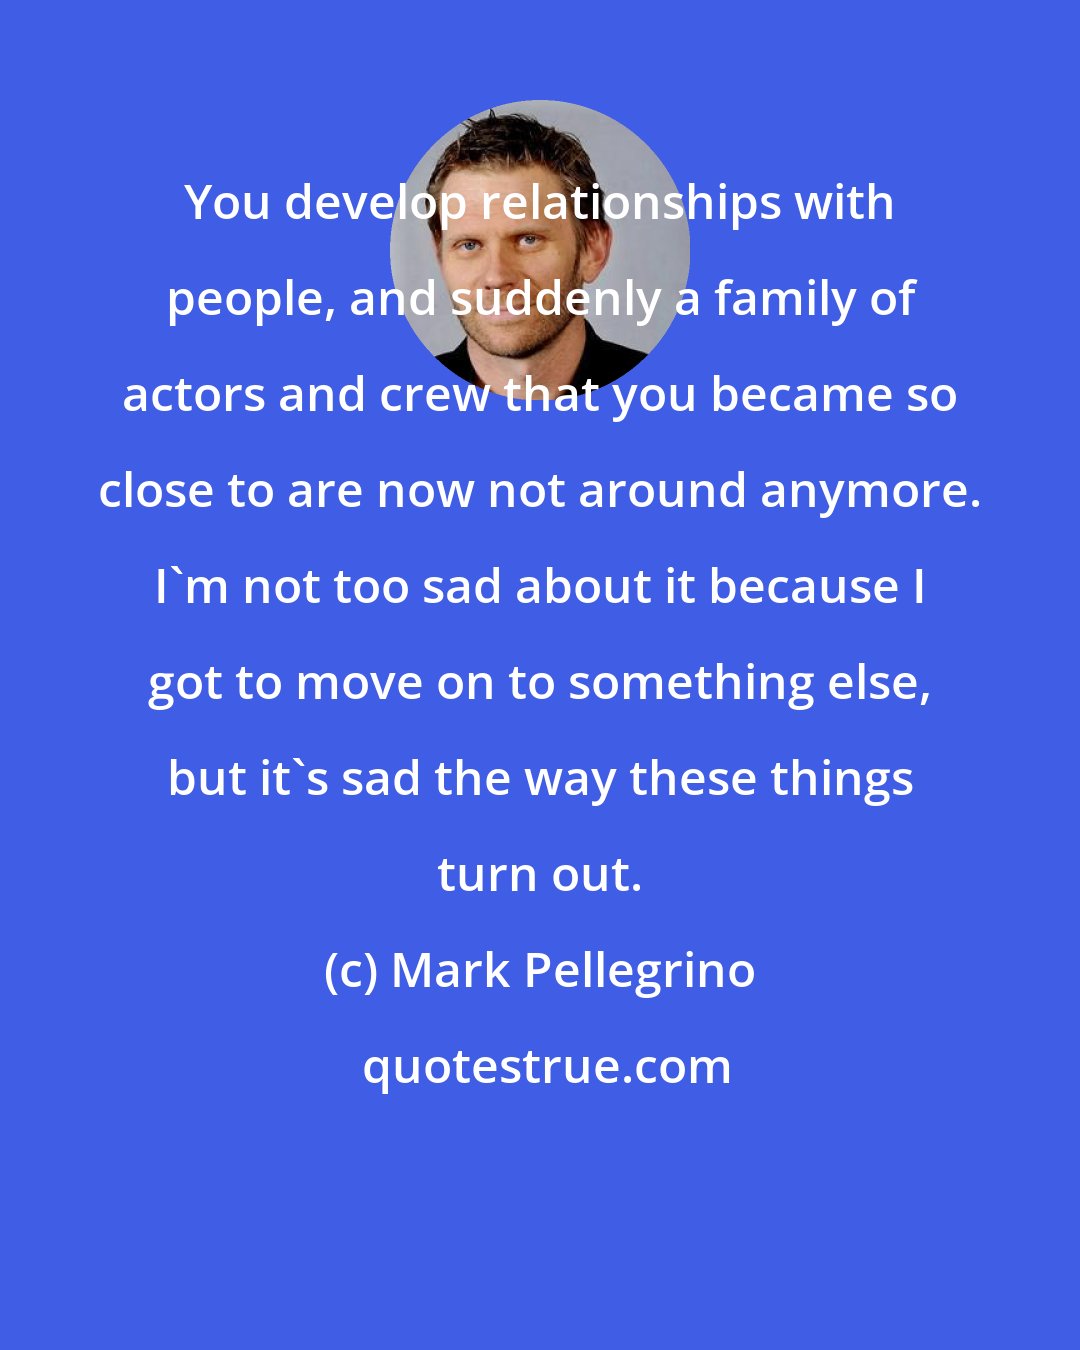 Mark Pellegrino: You develop relationships with people, and suddenly a family of actors and crew that you became so close to are now not around anymore. I'm not too sad about it because I got to move on to something else, but it's sad the way these things turn out.